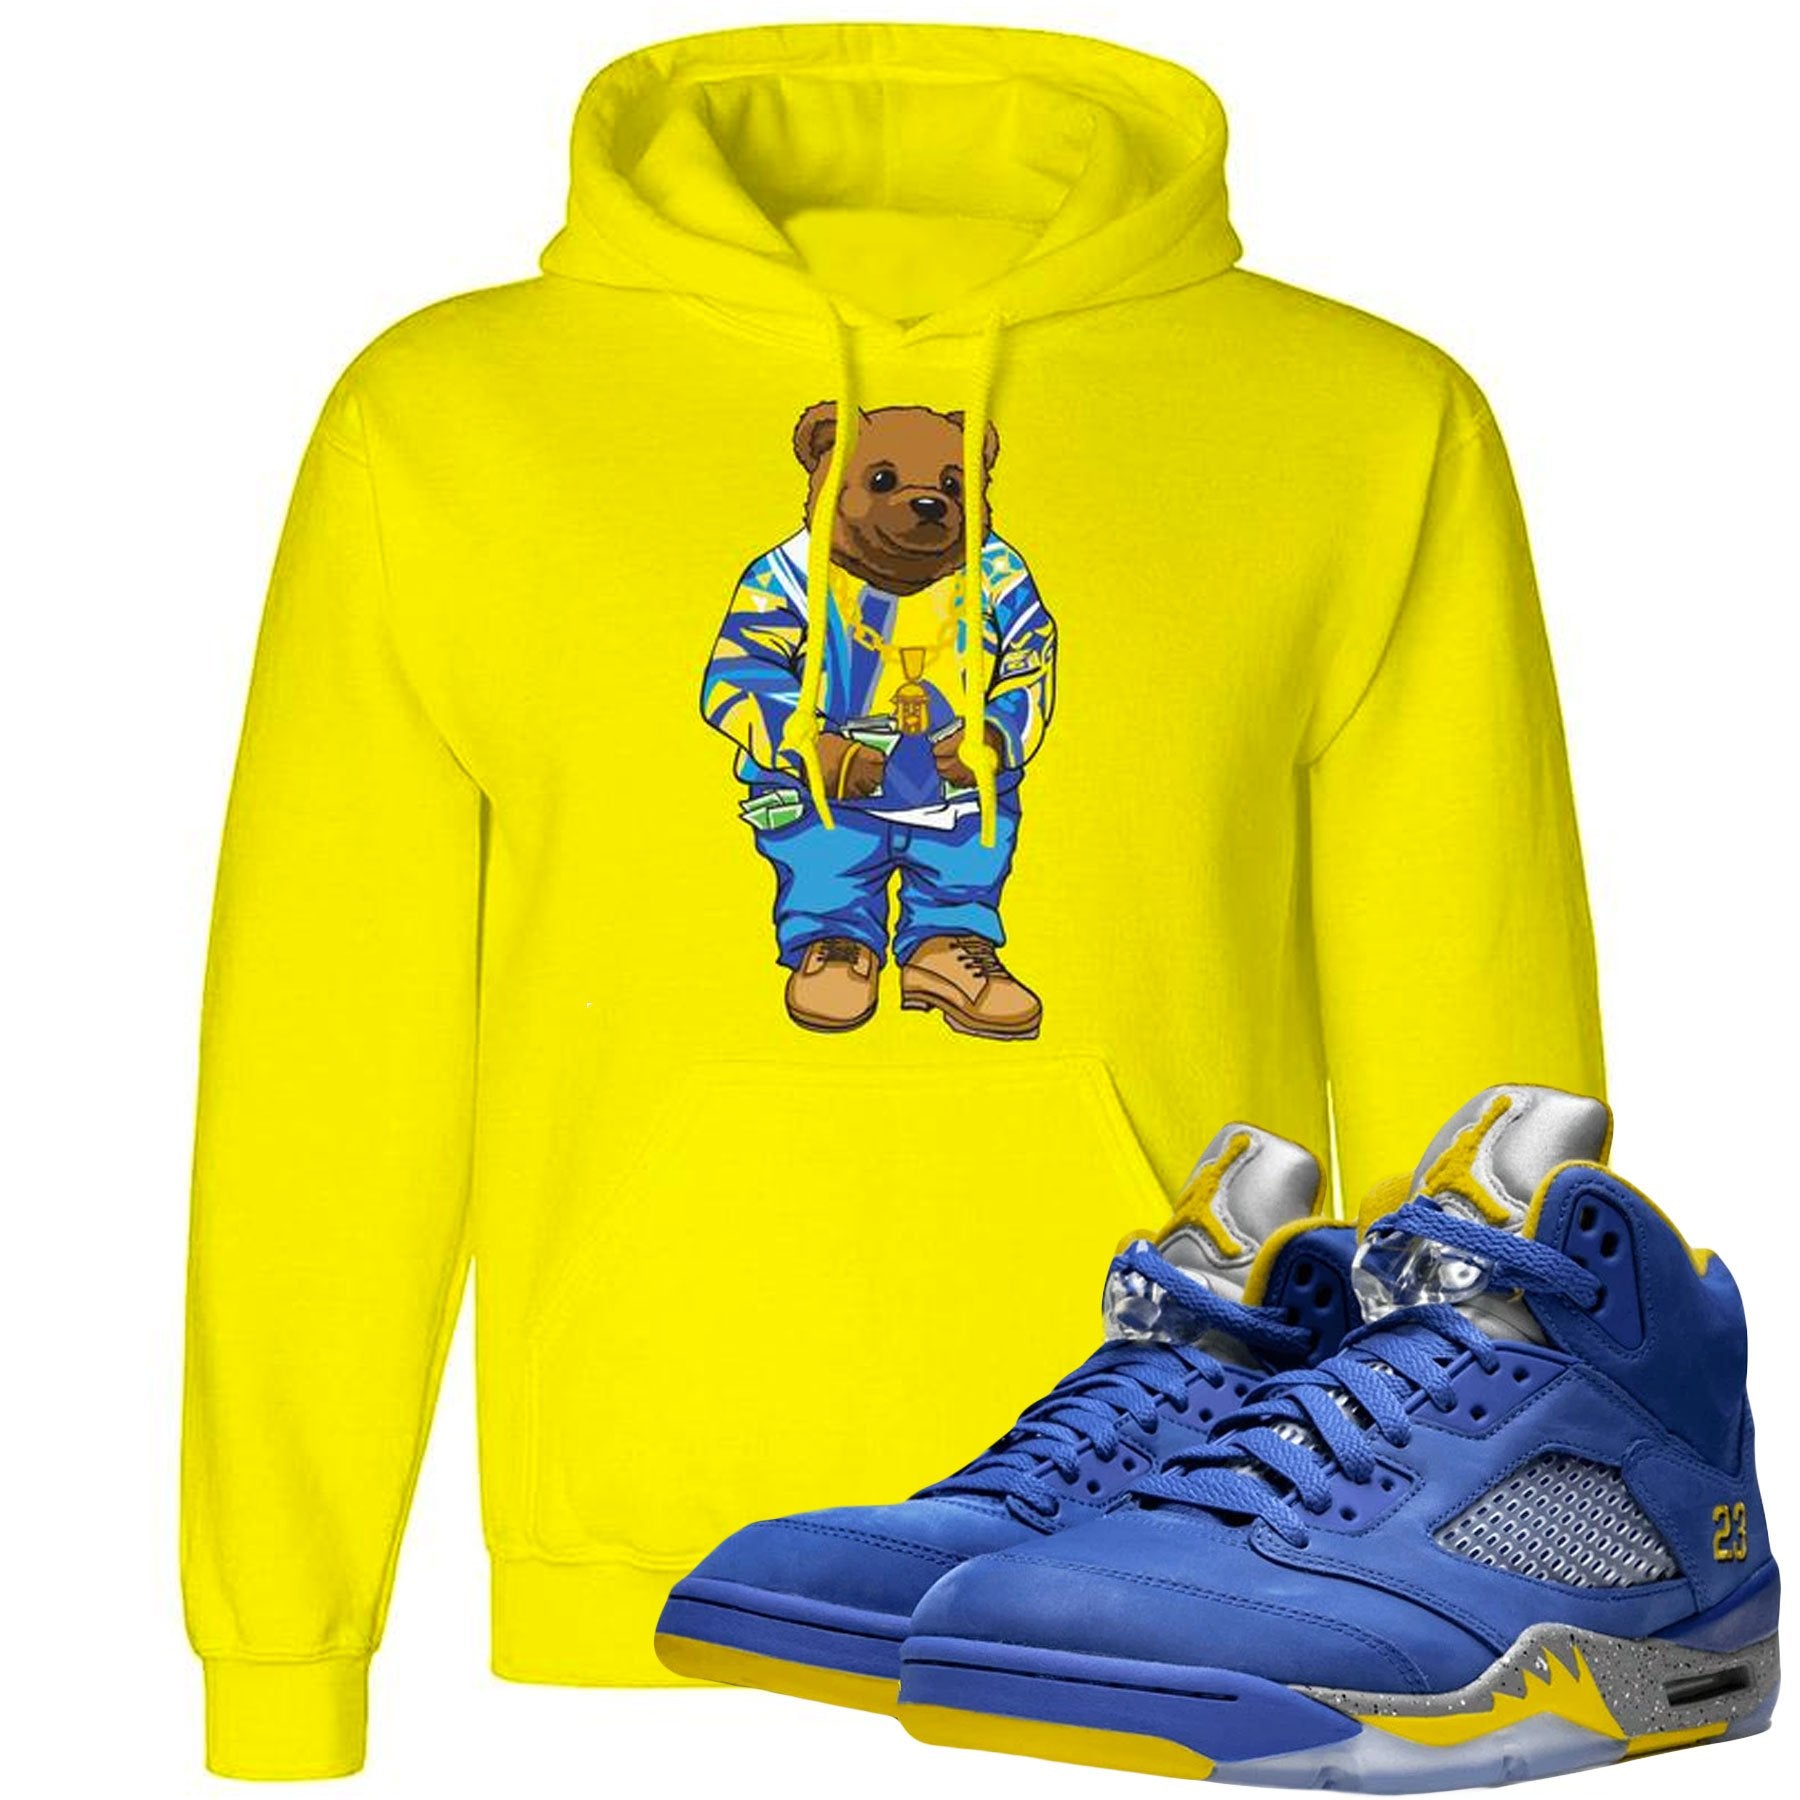 This yellow hoodie will match great with your Jordan 5 Alternate Laney JSP shoes